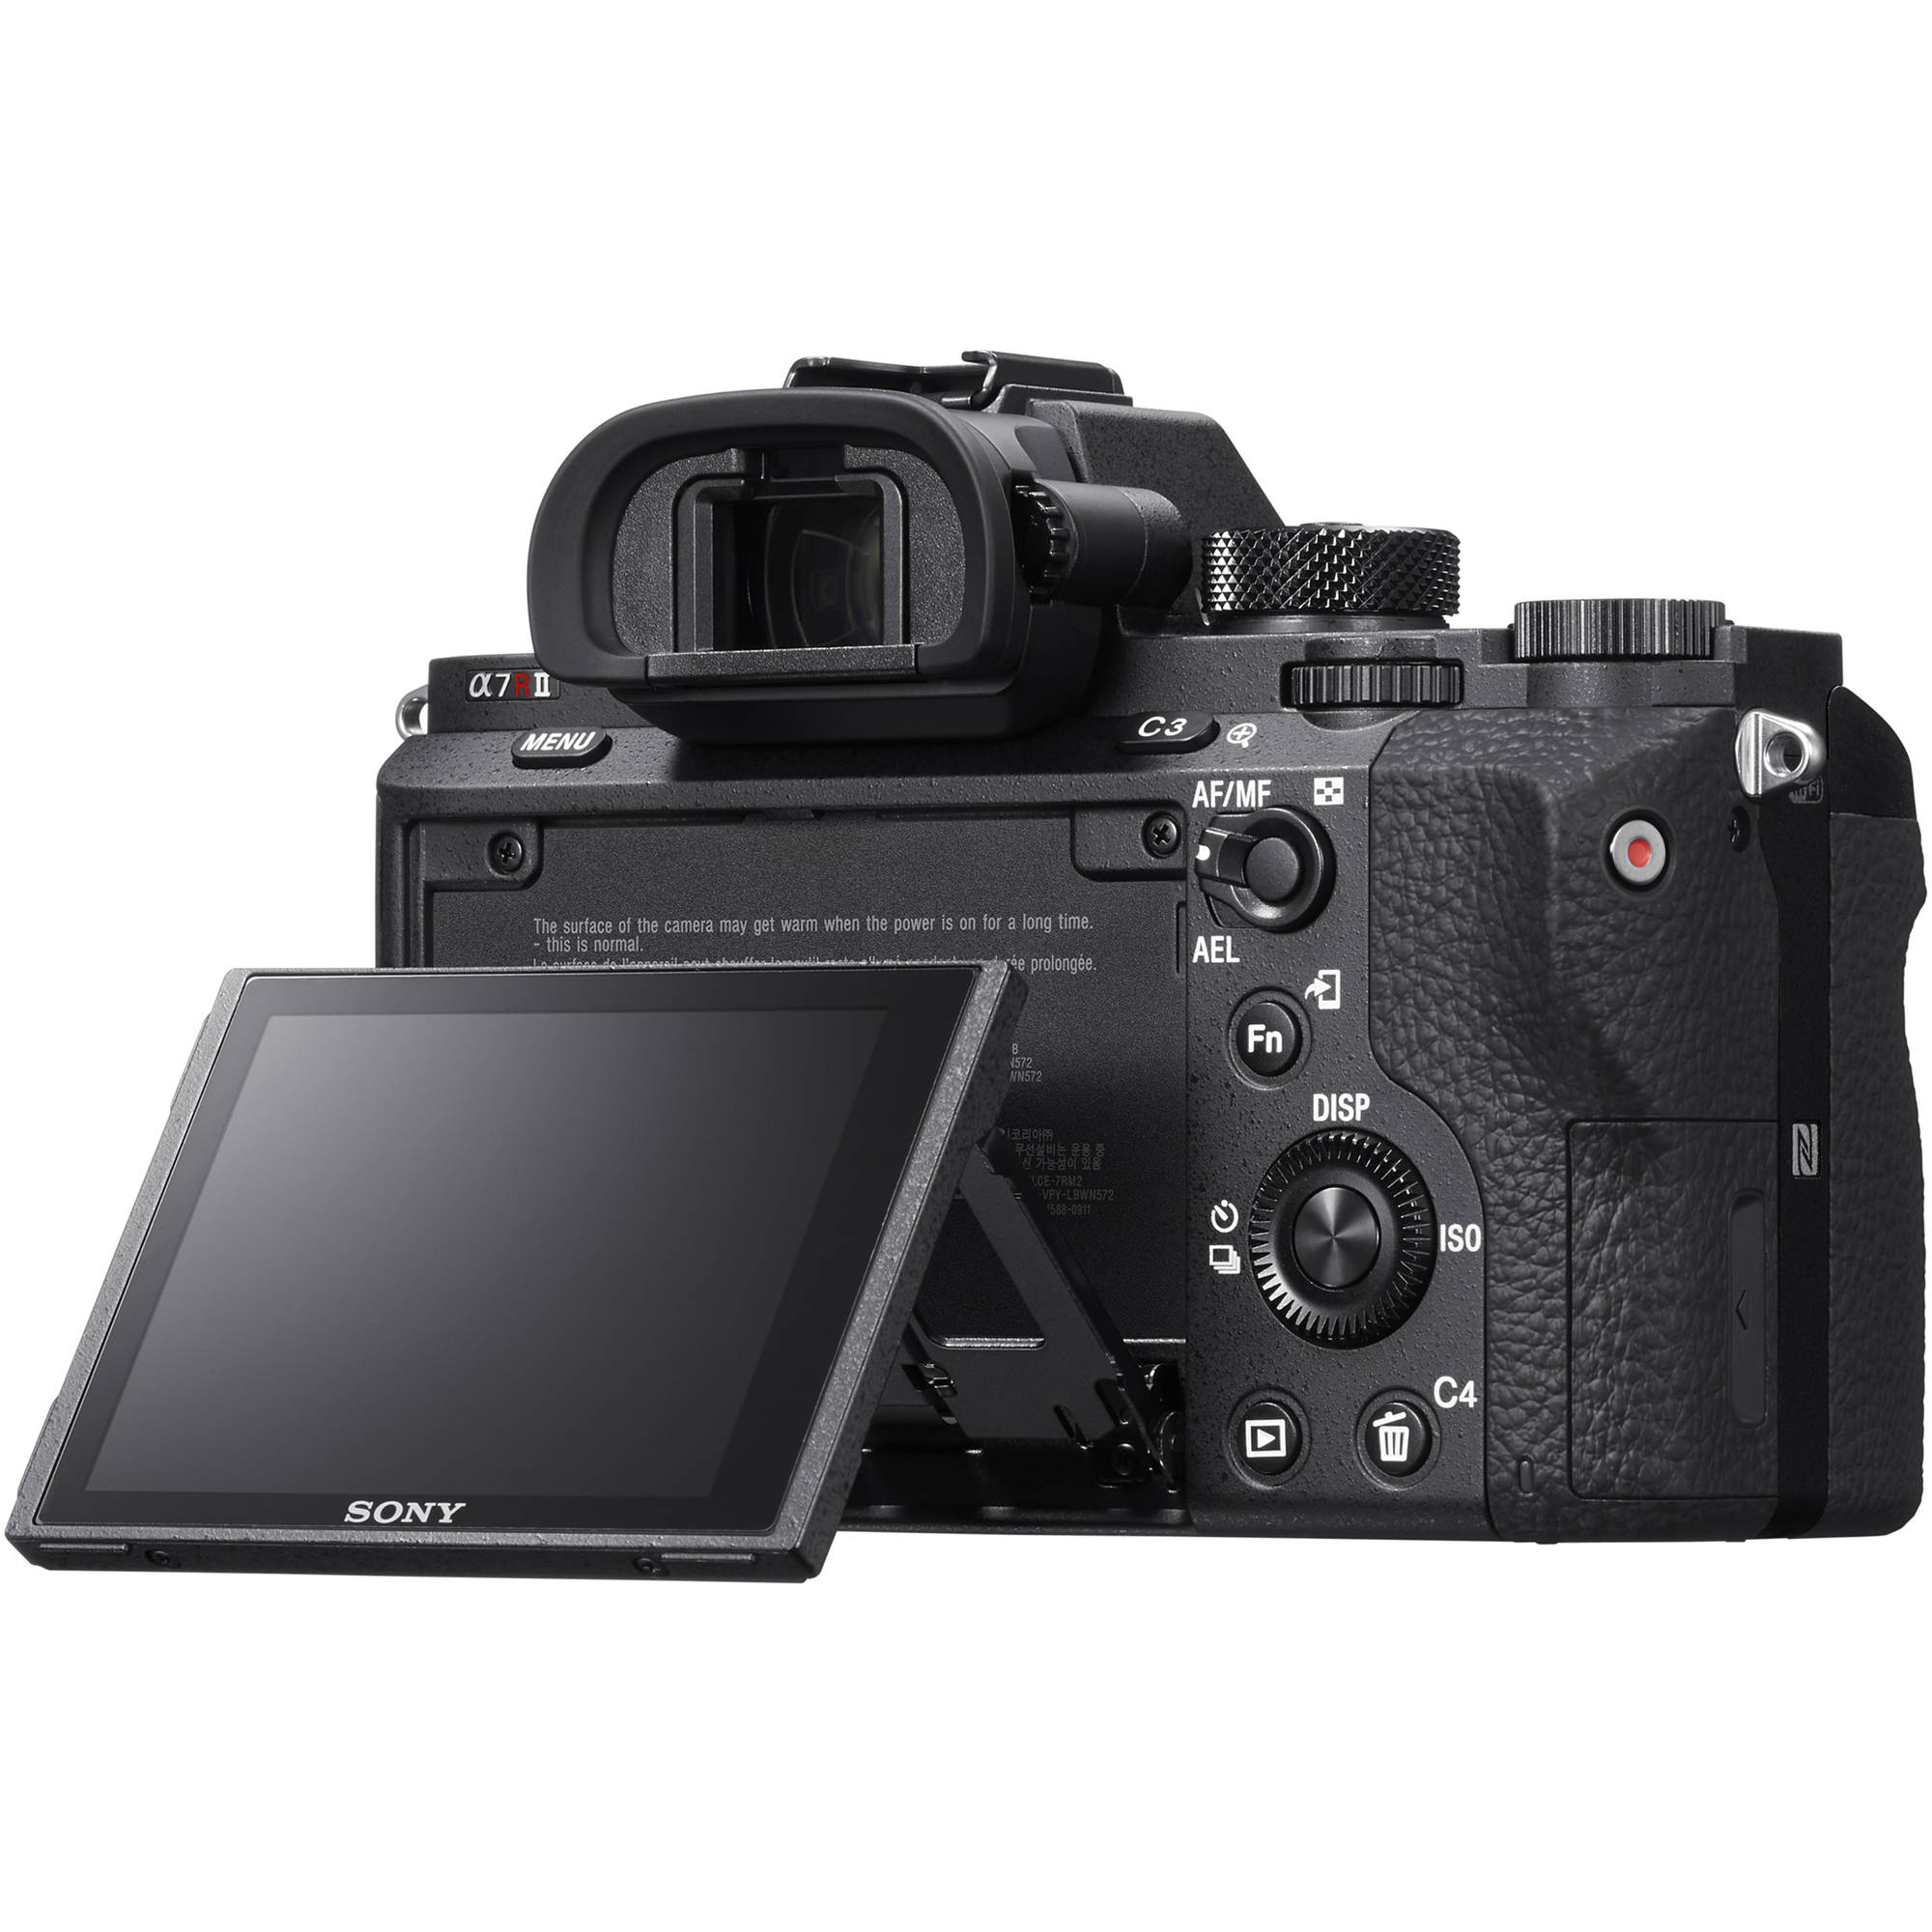 Sony a7R II Full-frame Mirrorless 42.4MP Camera Body + 64GB SDXC Memory Card + Soft Carrying Case + NP-FW50 Battery and Charger + Wireless Remote + Card Reader + Mini Tripod+More - image 4 of 9